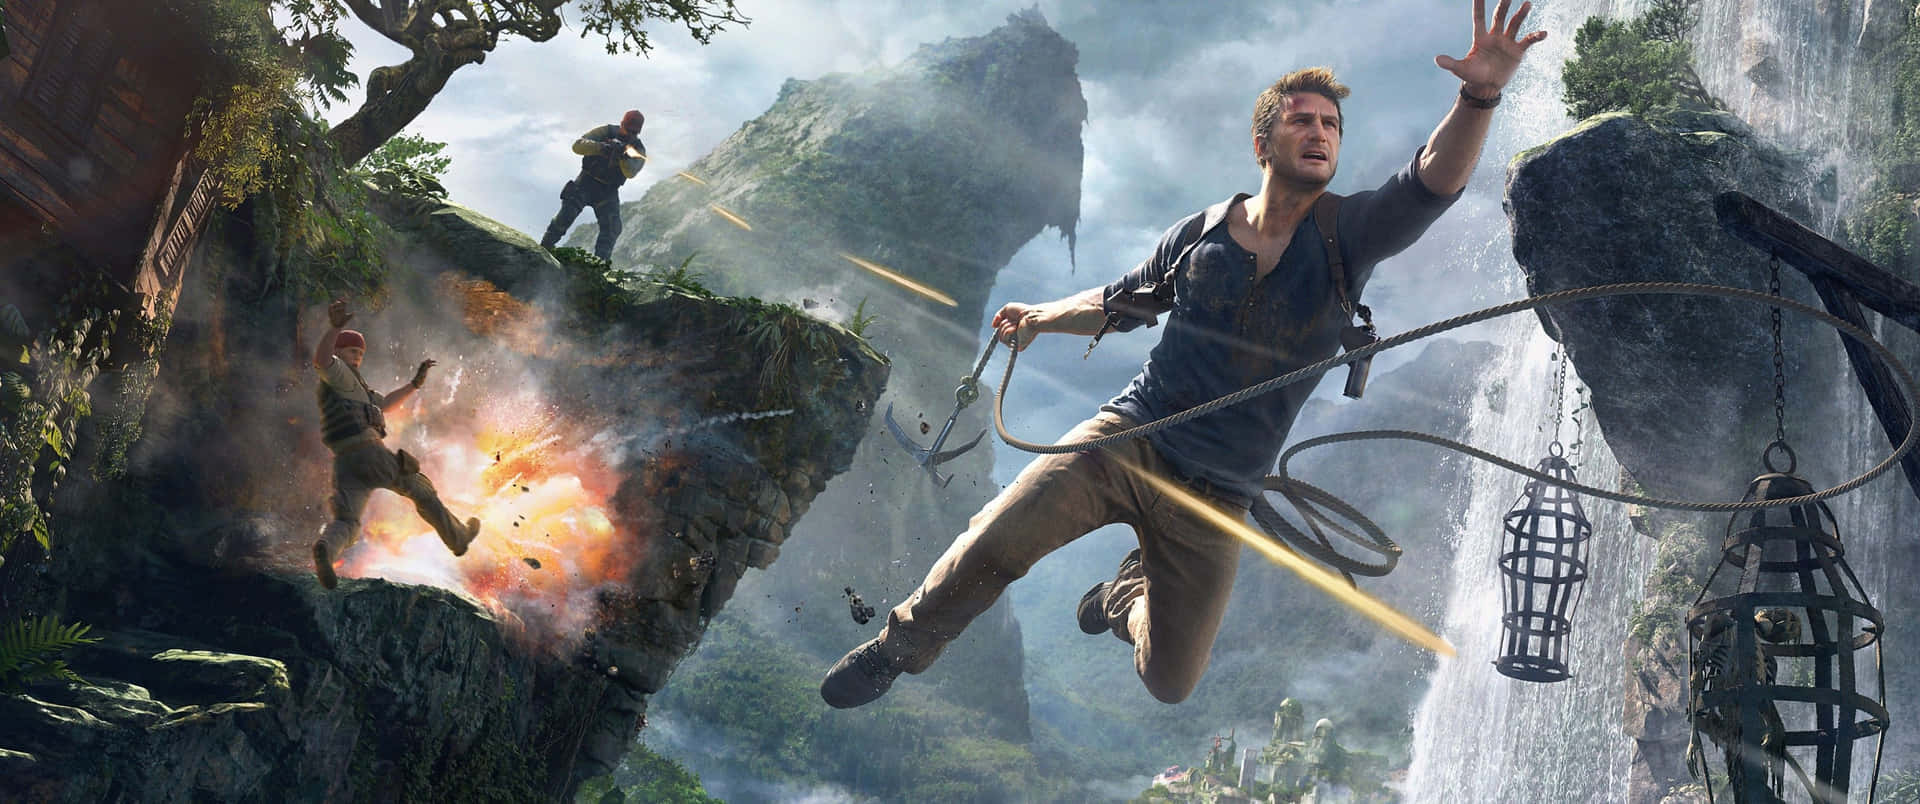 3440x1440 spil Uncharted 4: A Thief's End Wallpaper